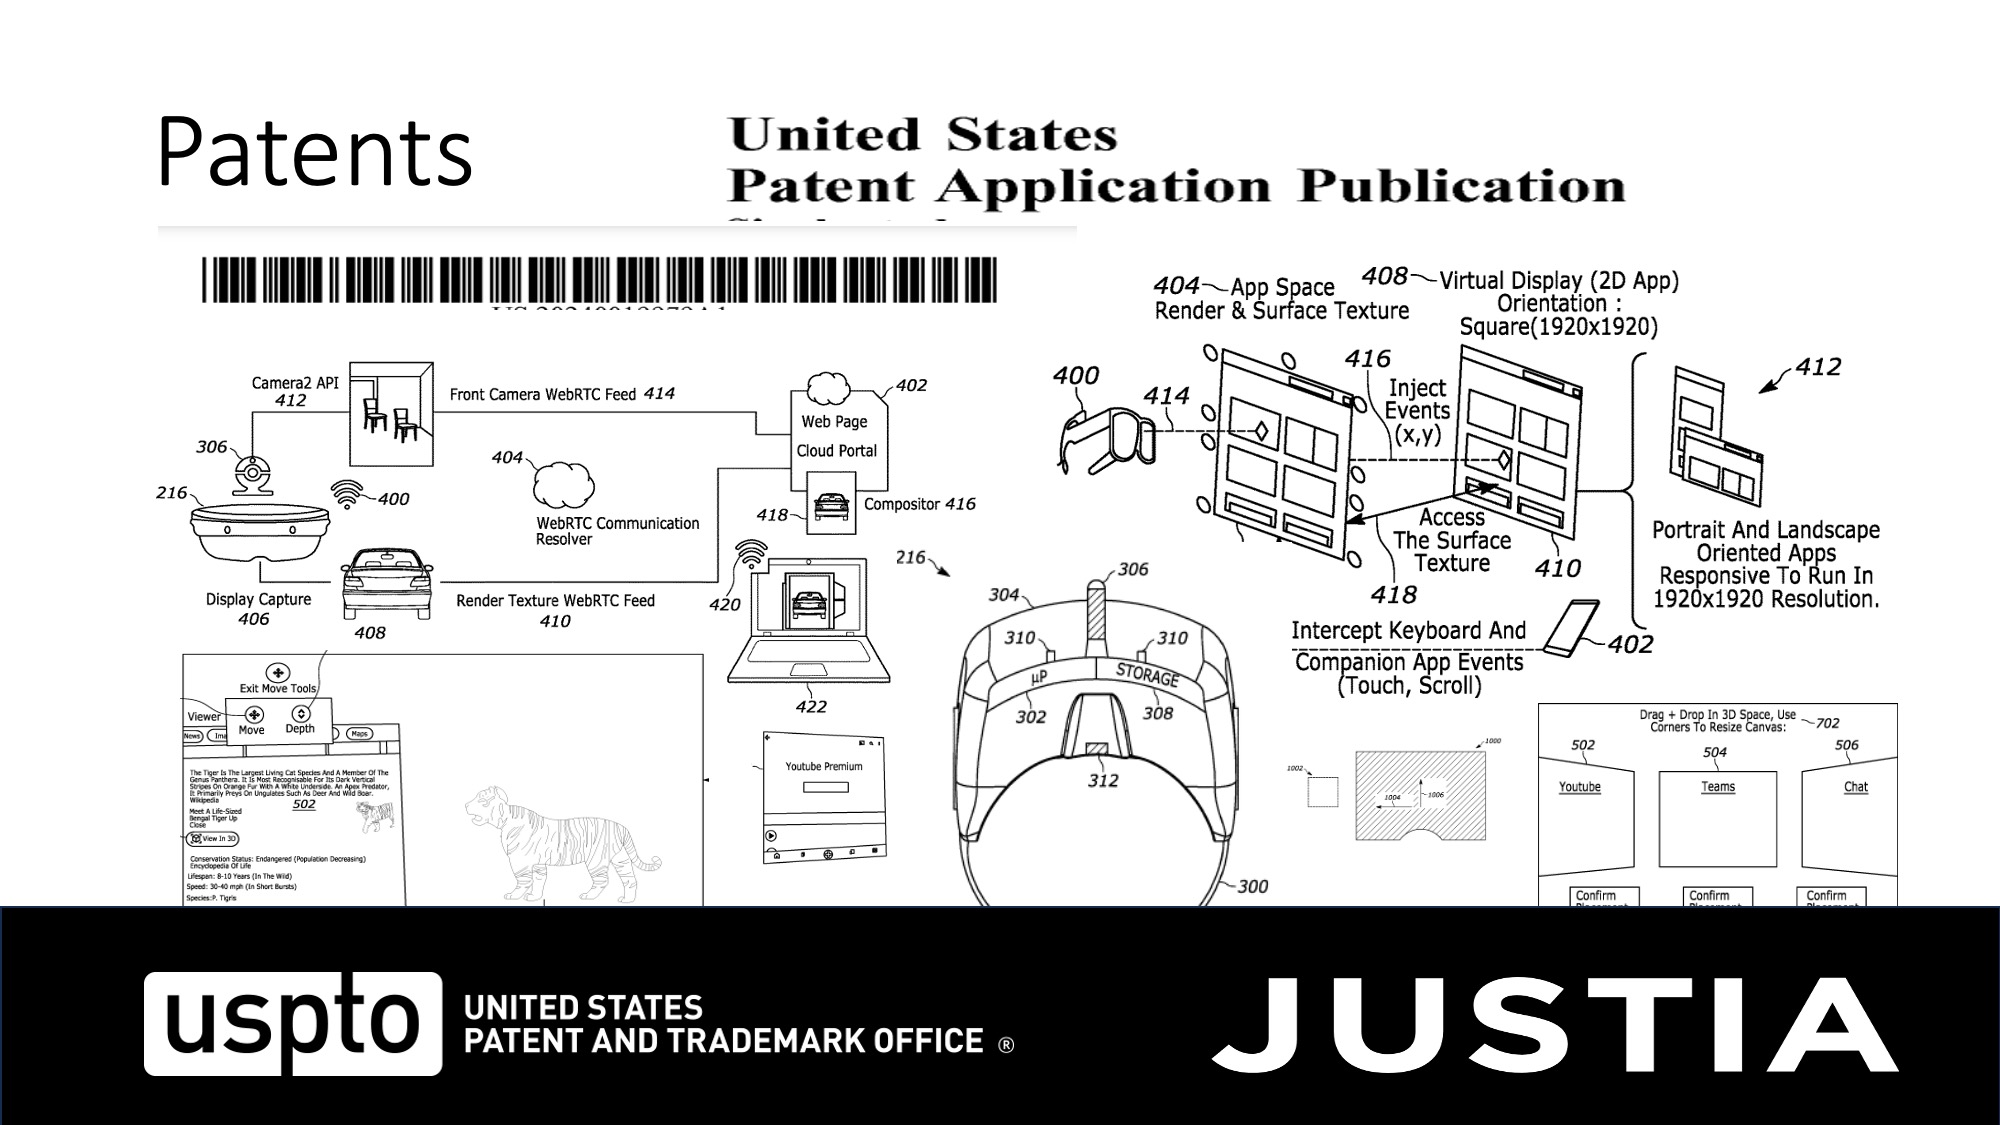 image from Patents